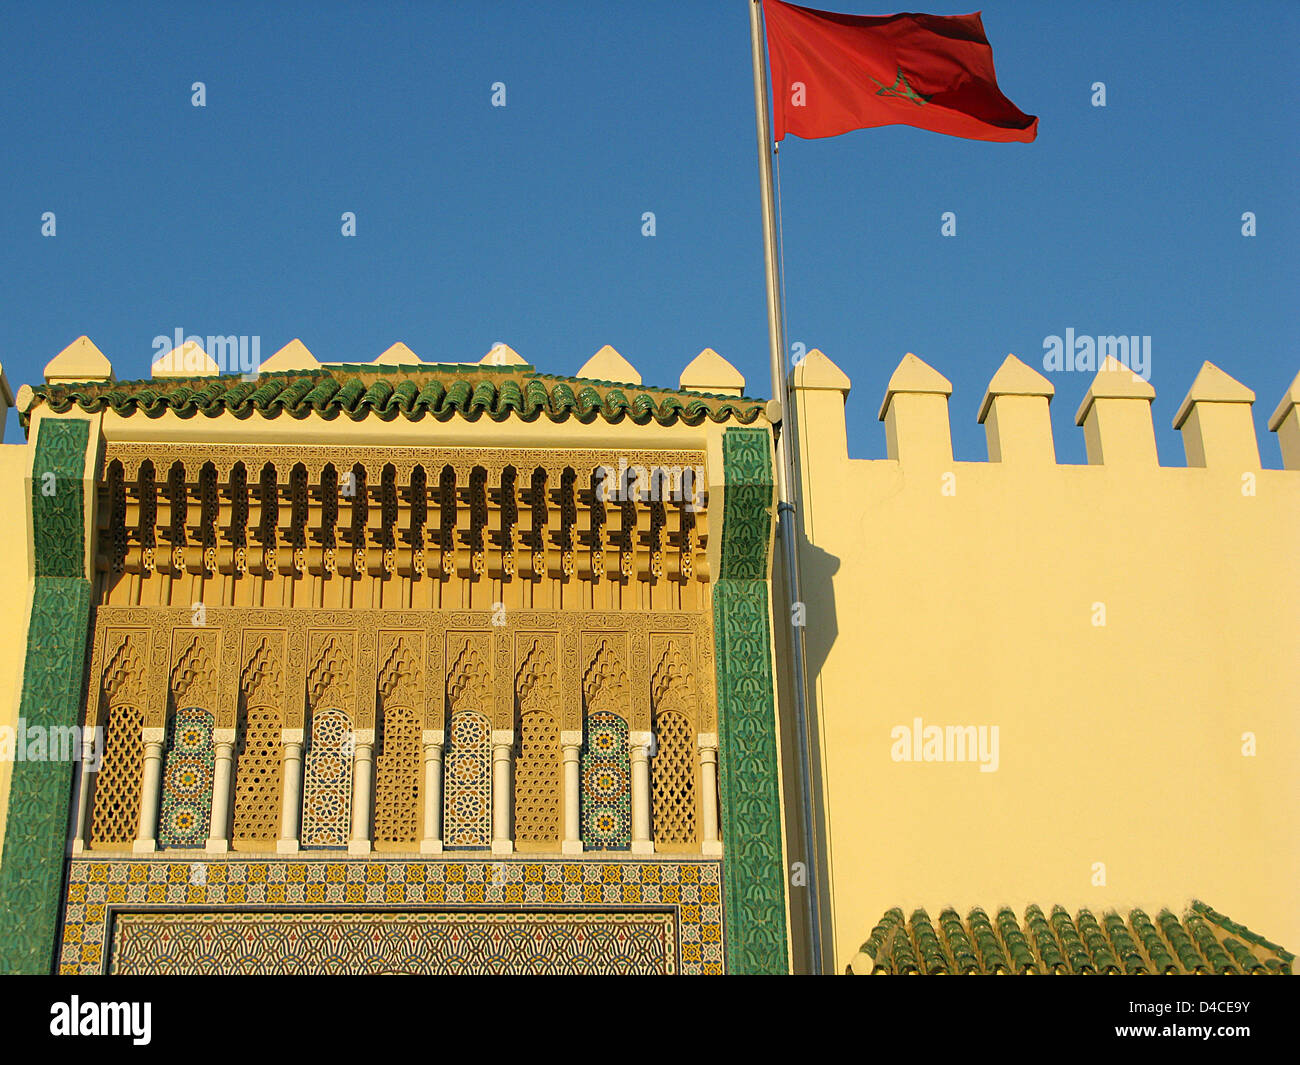 The Moroccan flage flies above an entrance gate to the Royal Palace in Fes, Morocco, 15 December 2007. Photo: Lars Halbauer Stock Photo